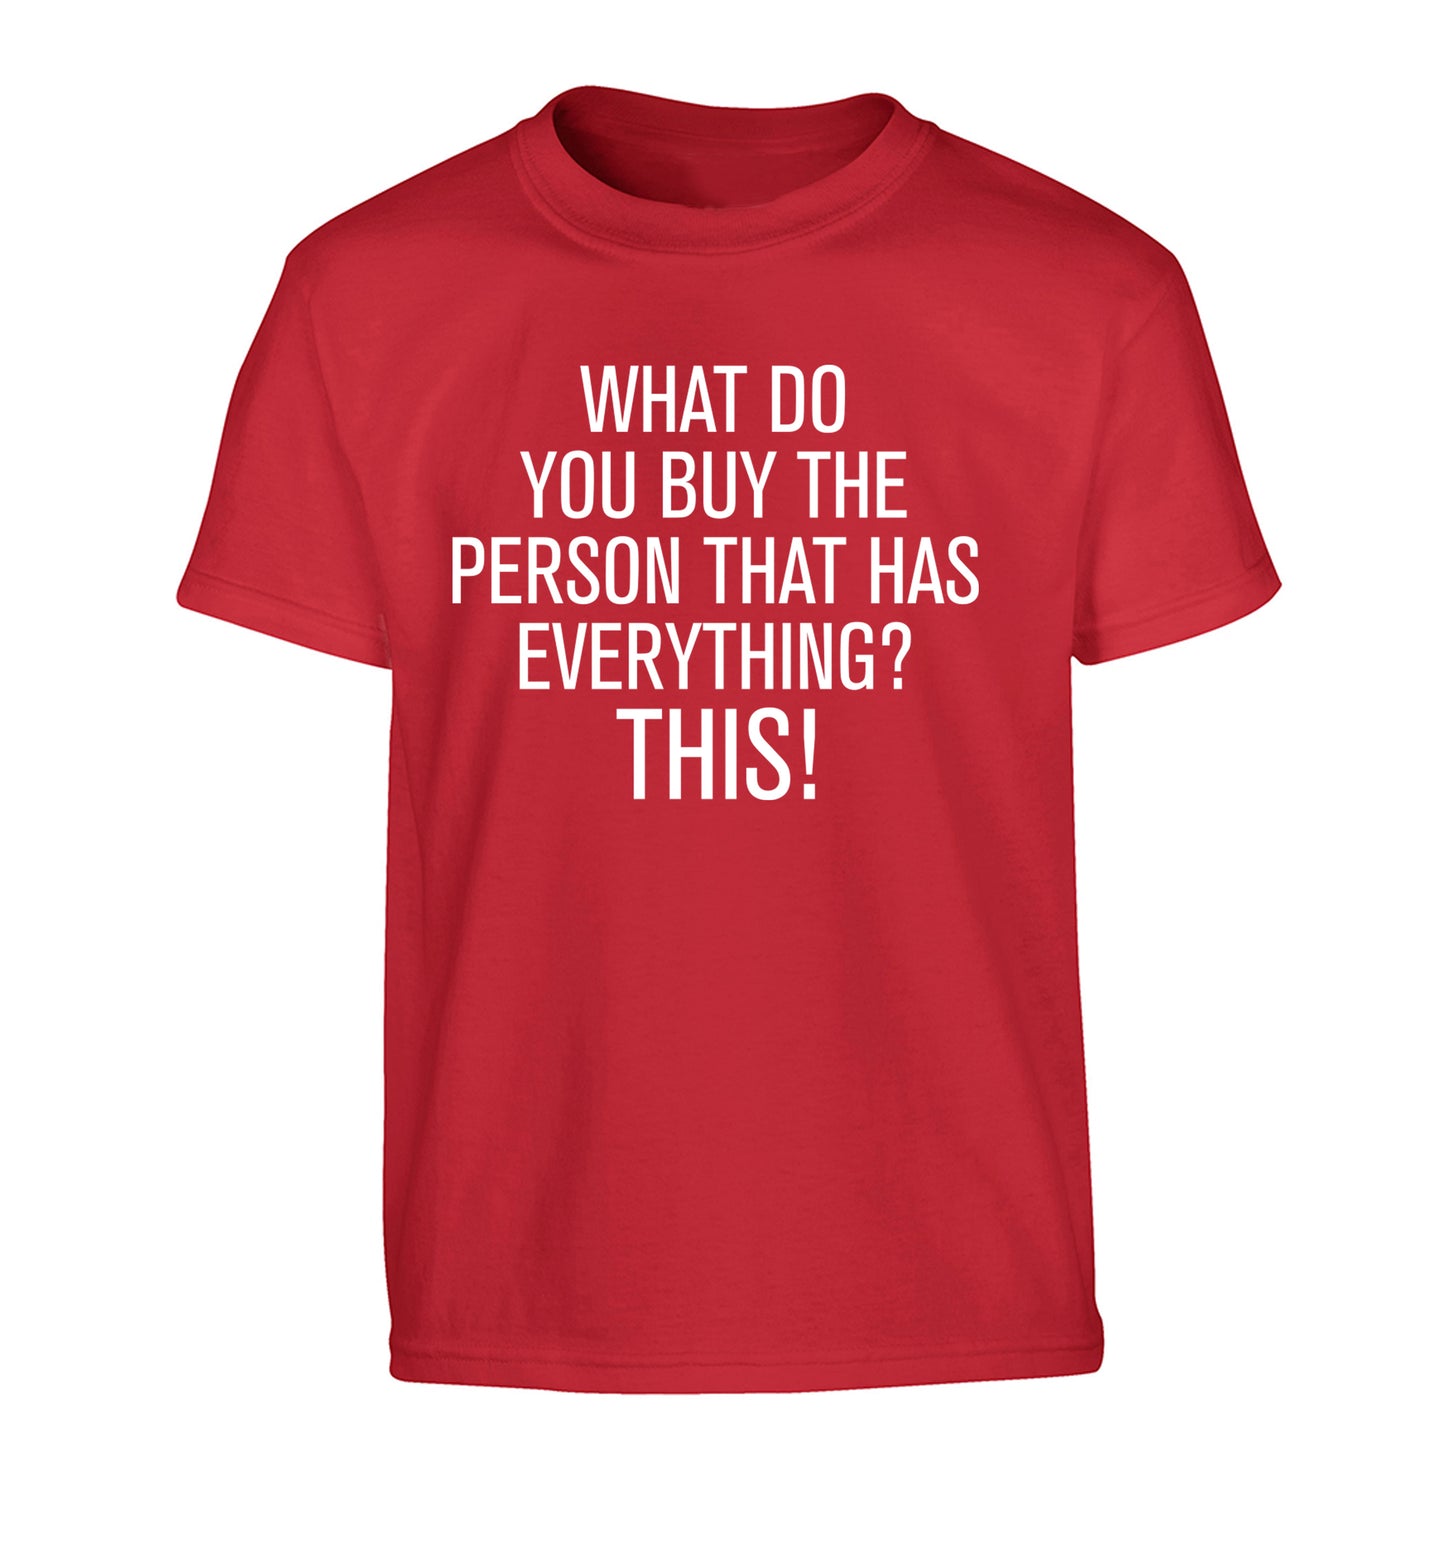 What do you buy the person that has everything? This! Children's red Tshirt 12-13 Years